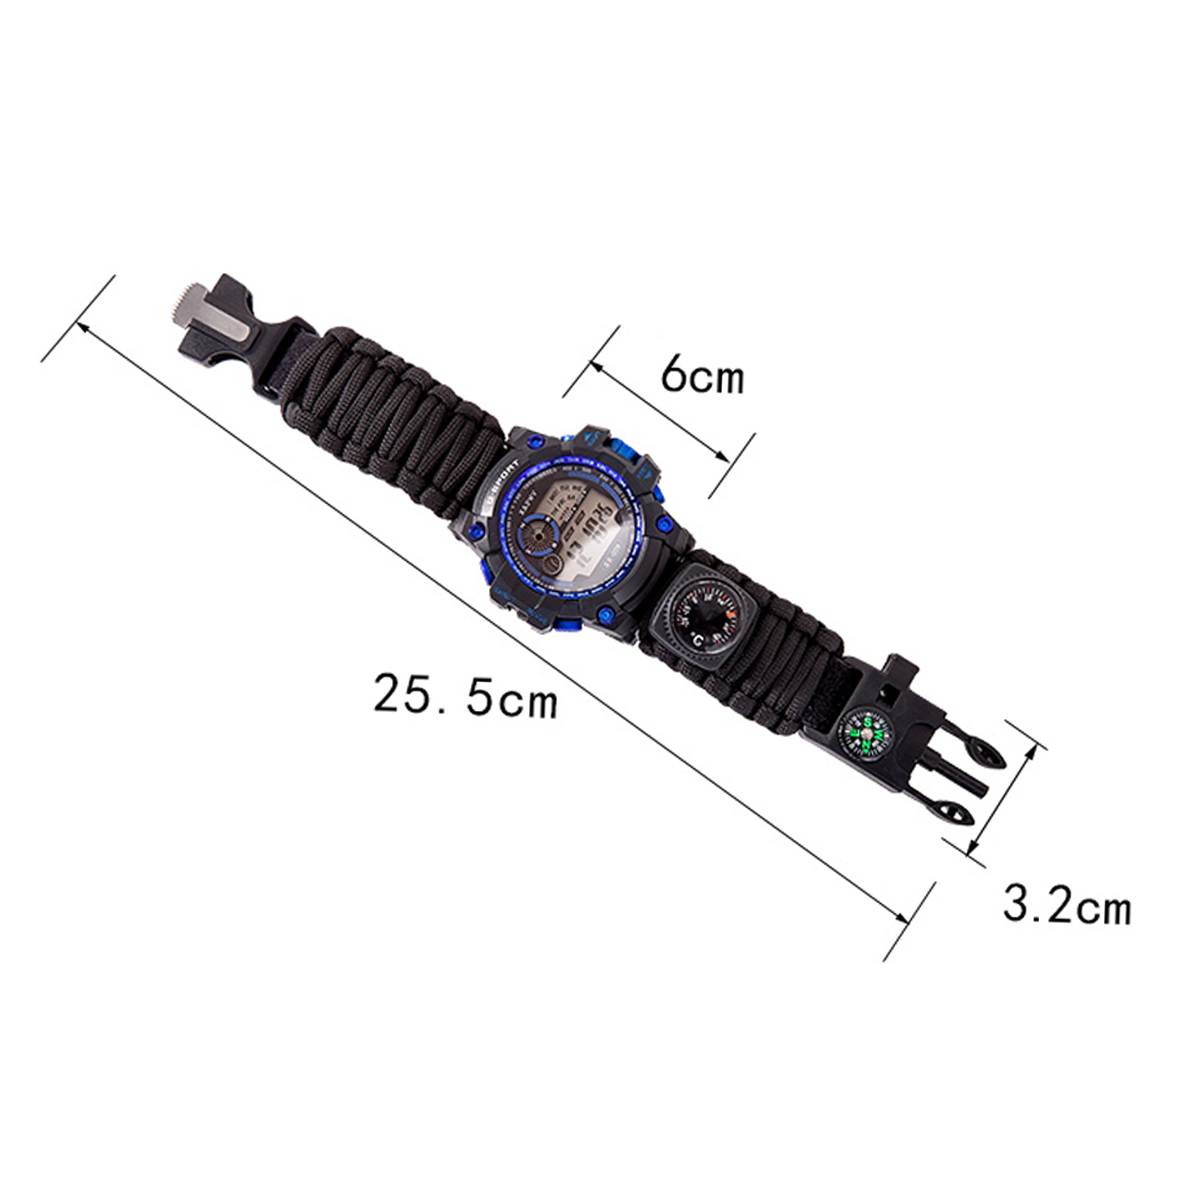 7 In 1 Survival Watch Camping Multifunctional Compass Date Alarm Paracord Bracelet LED Backlight Gadget EDC Tool